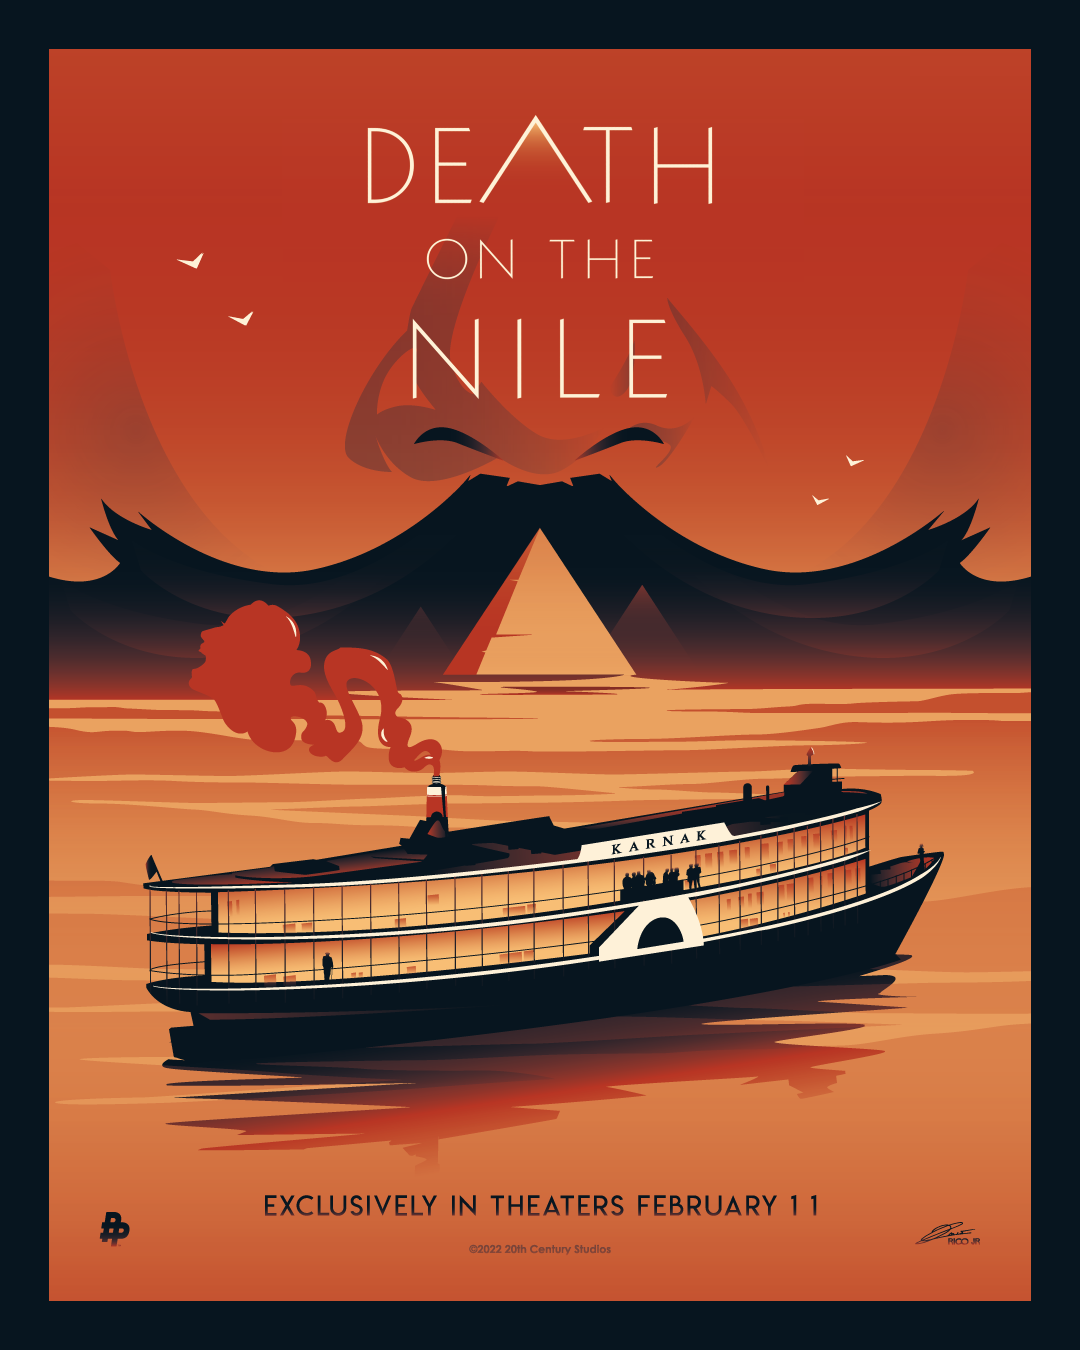 Artwork by 20th Century Studios – Death On The Nile